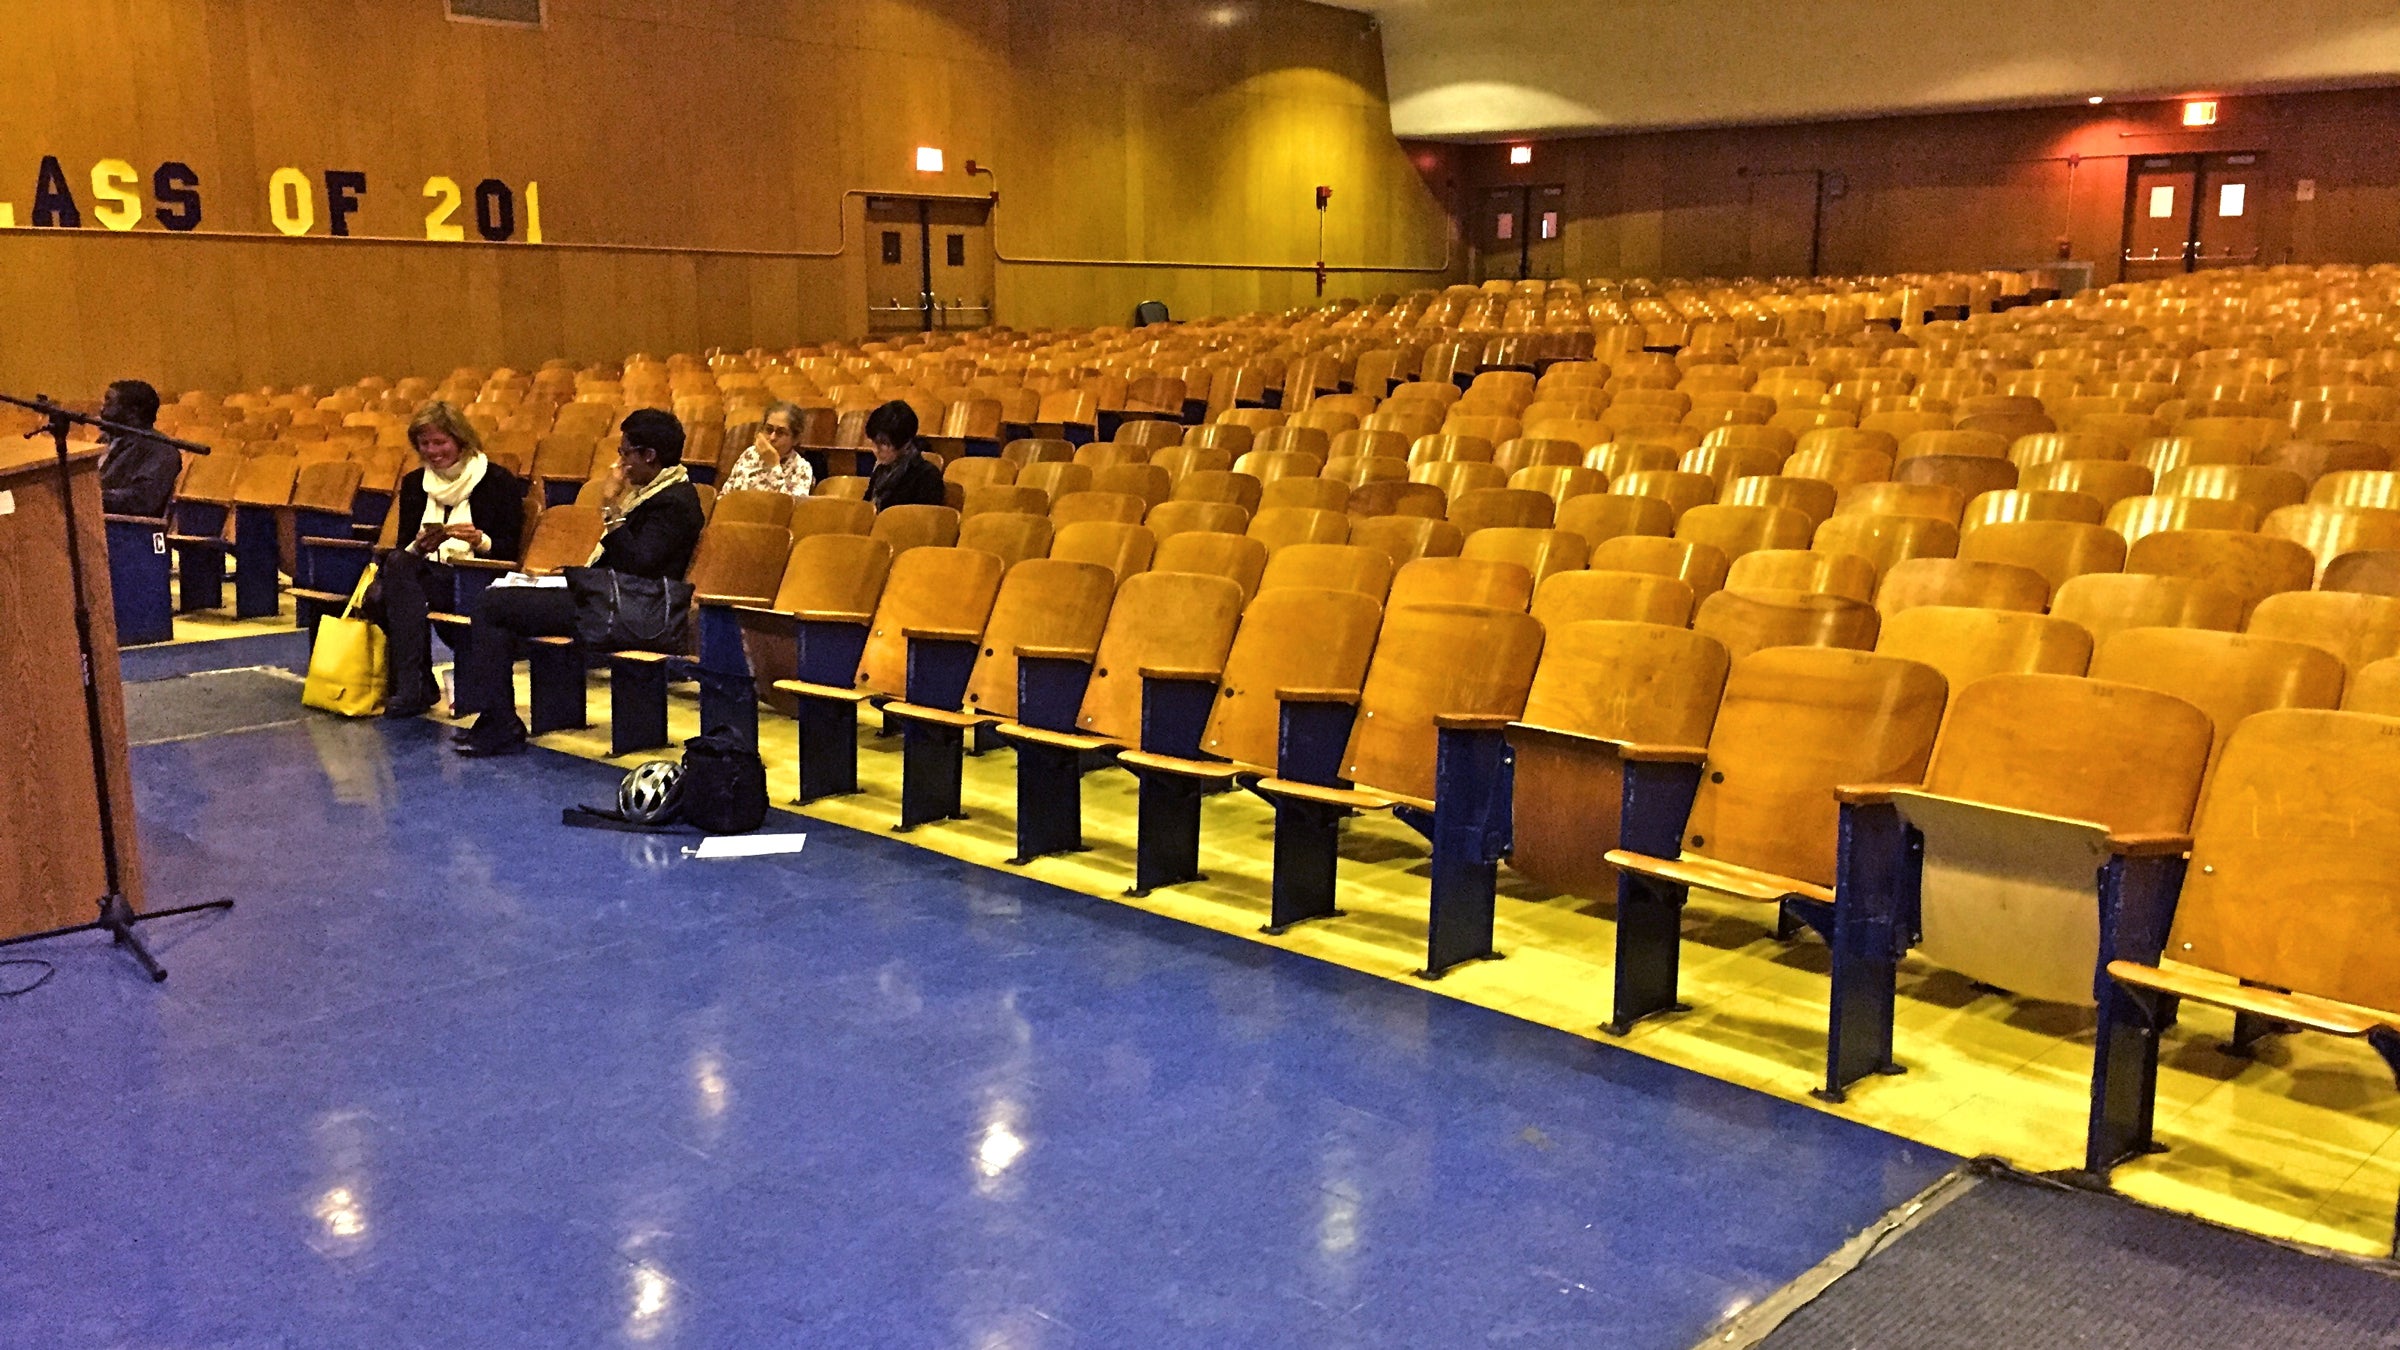 A handful of community members take seats in the Benjamin Franklin High School auditorium to learn about turnaround plans for the school. (Avi Wolfman-Arent/WHYY)